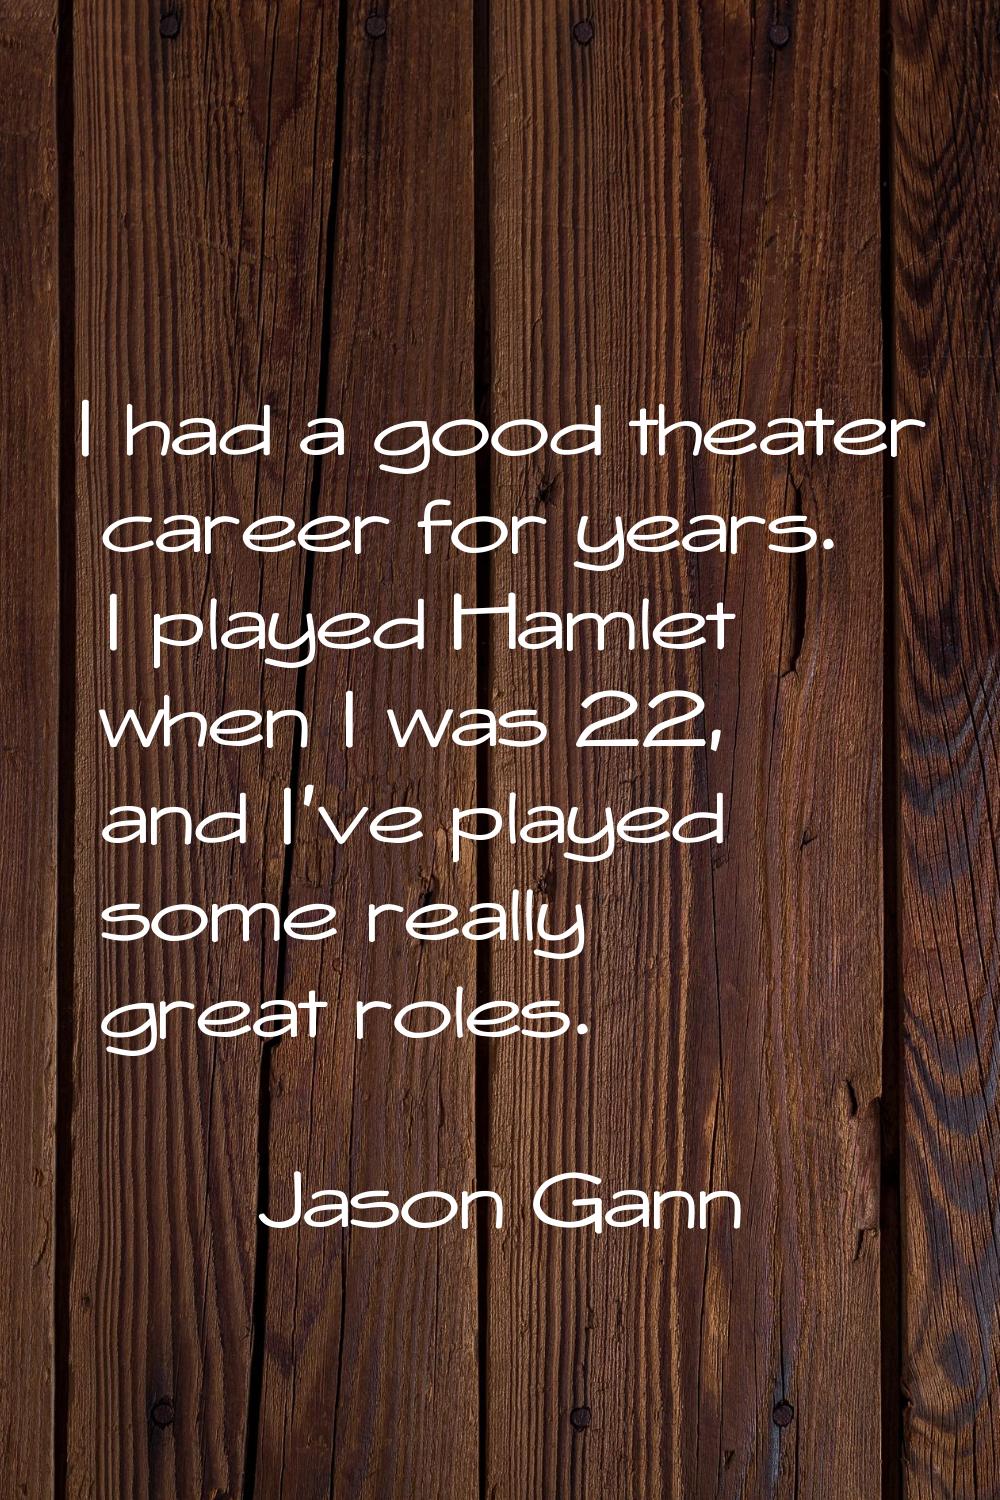 I had a good theater career for years. I played Hamlet when I was 22, and I've played some really g